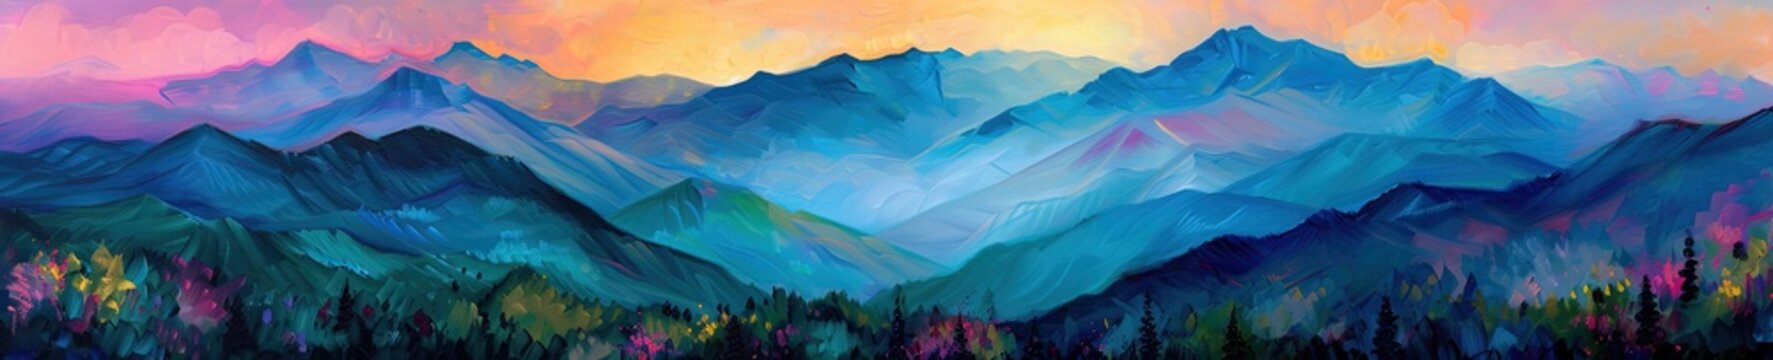 Colorful and vibrant mountain range. Panoramic landscape image